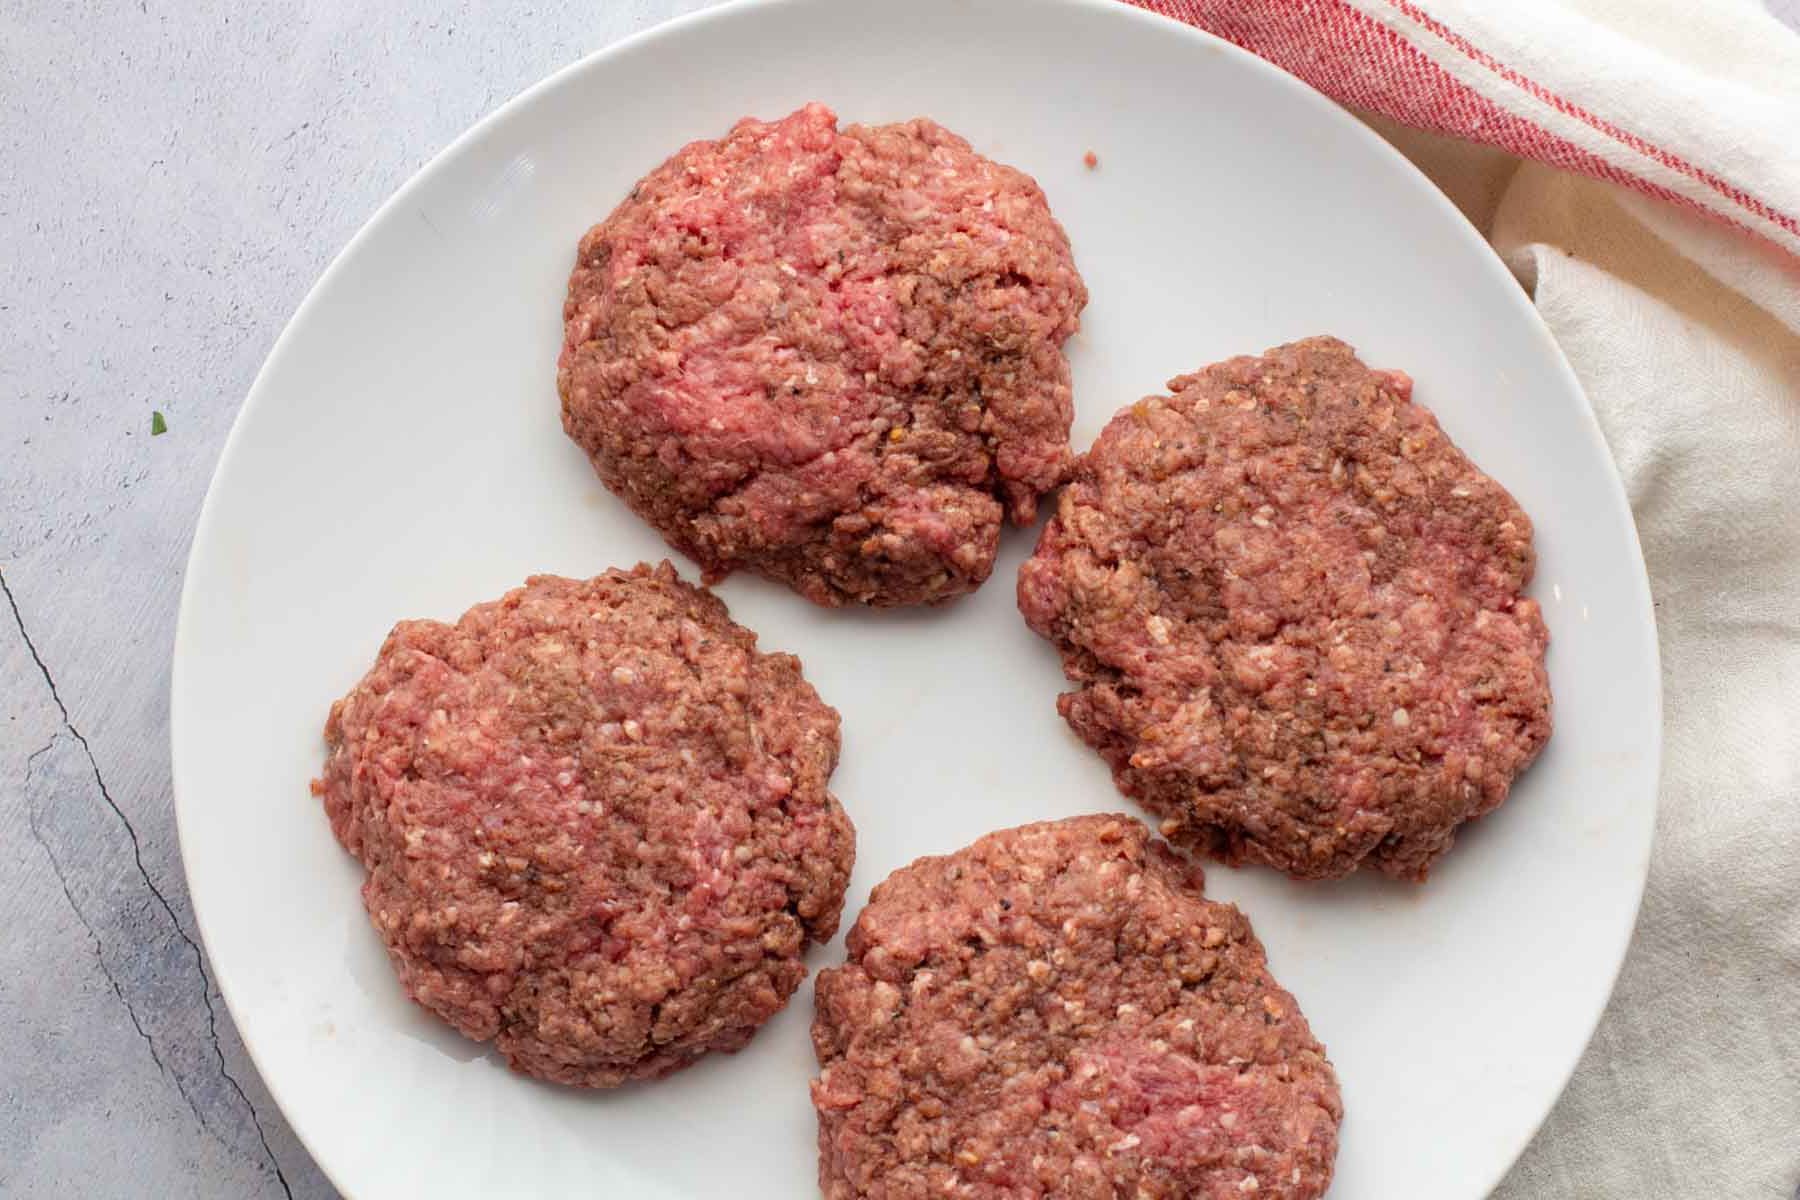 Steakhouse burger patties on a white plate.